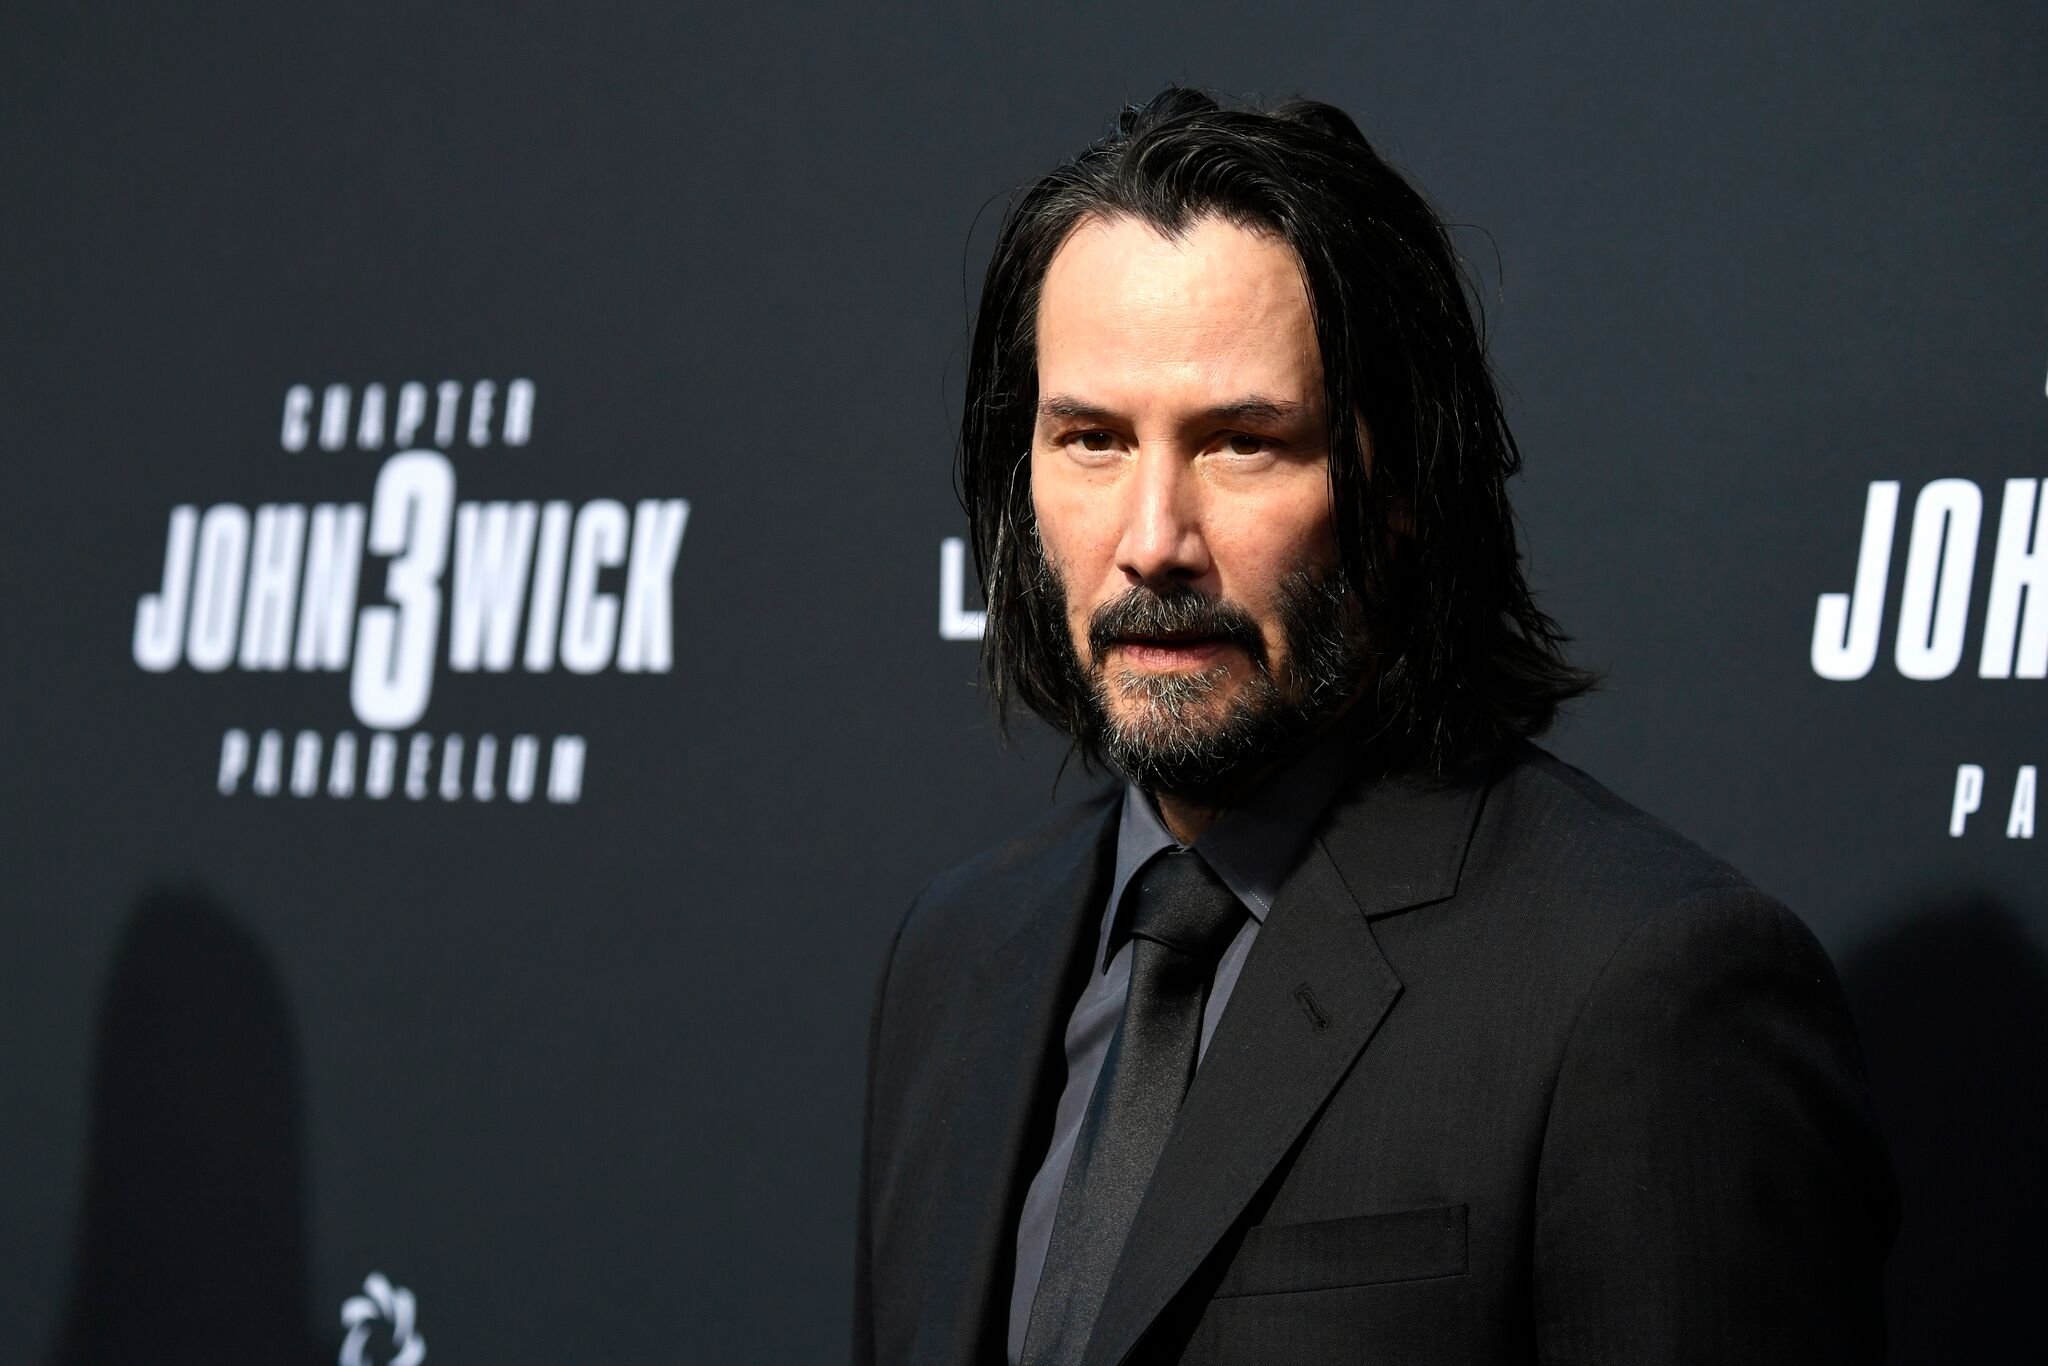 Keanu Reeves attends the special screening of Lionsgate's "John Wick: Chapter 3 - Parabellum" | Getty Images